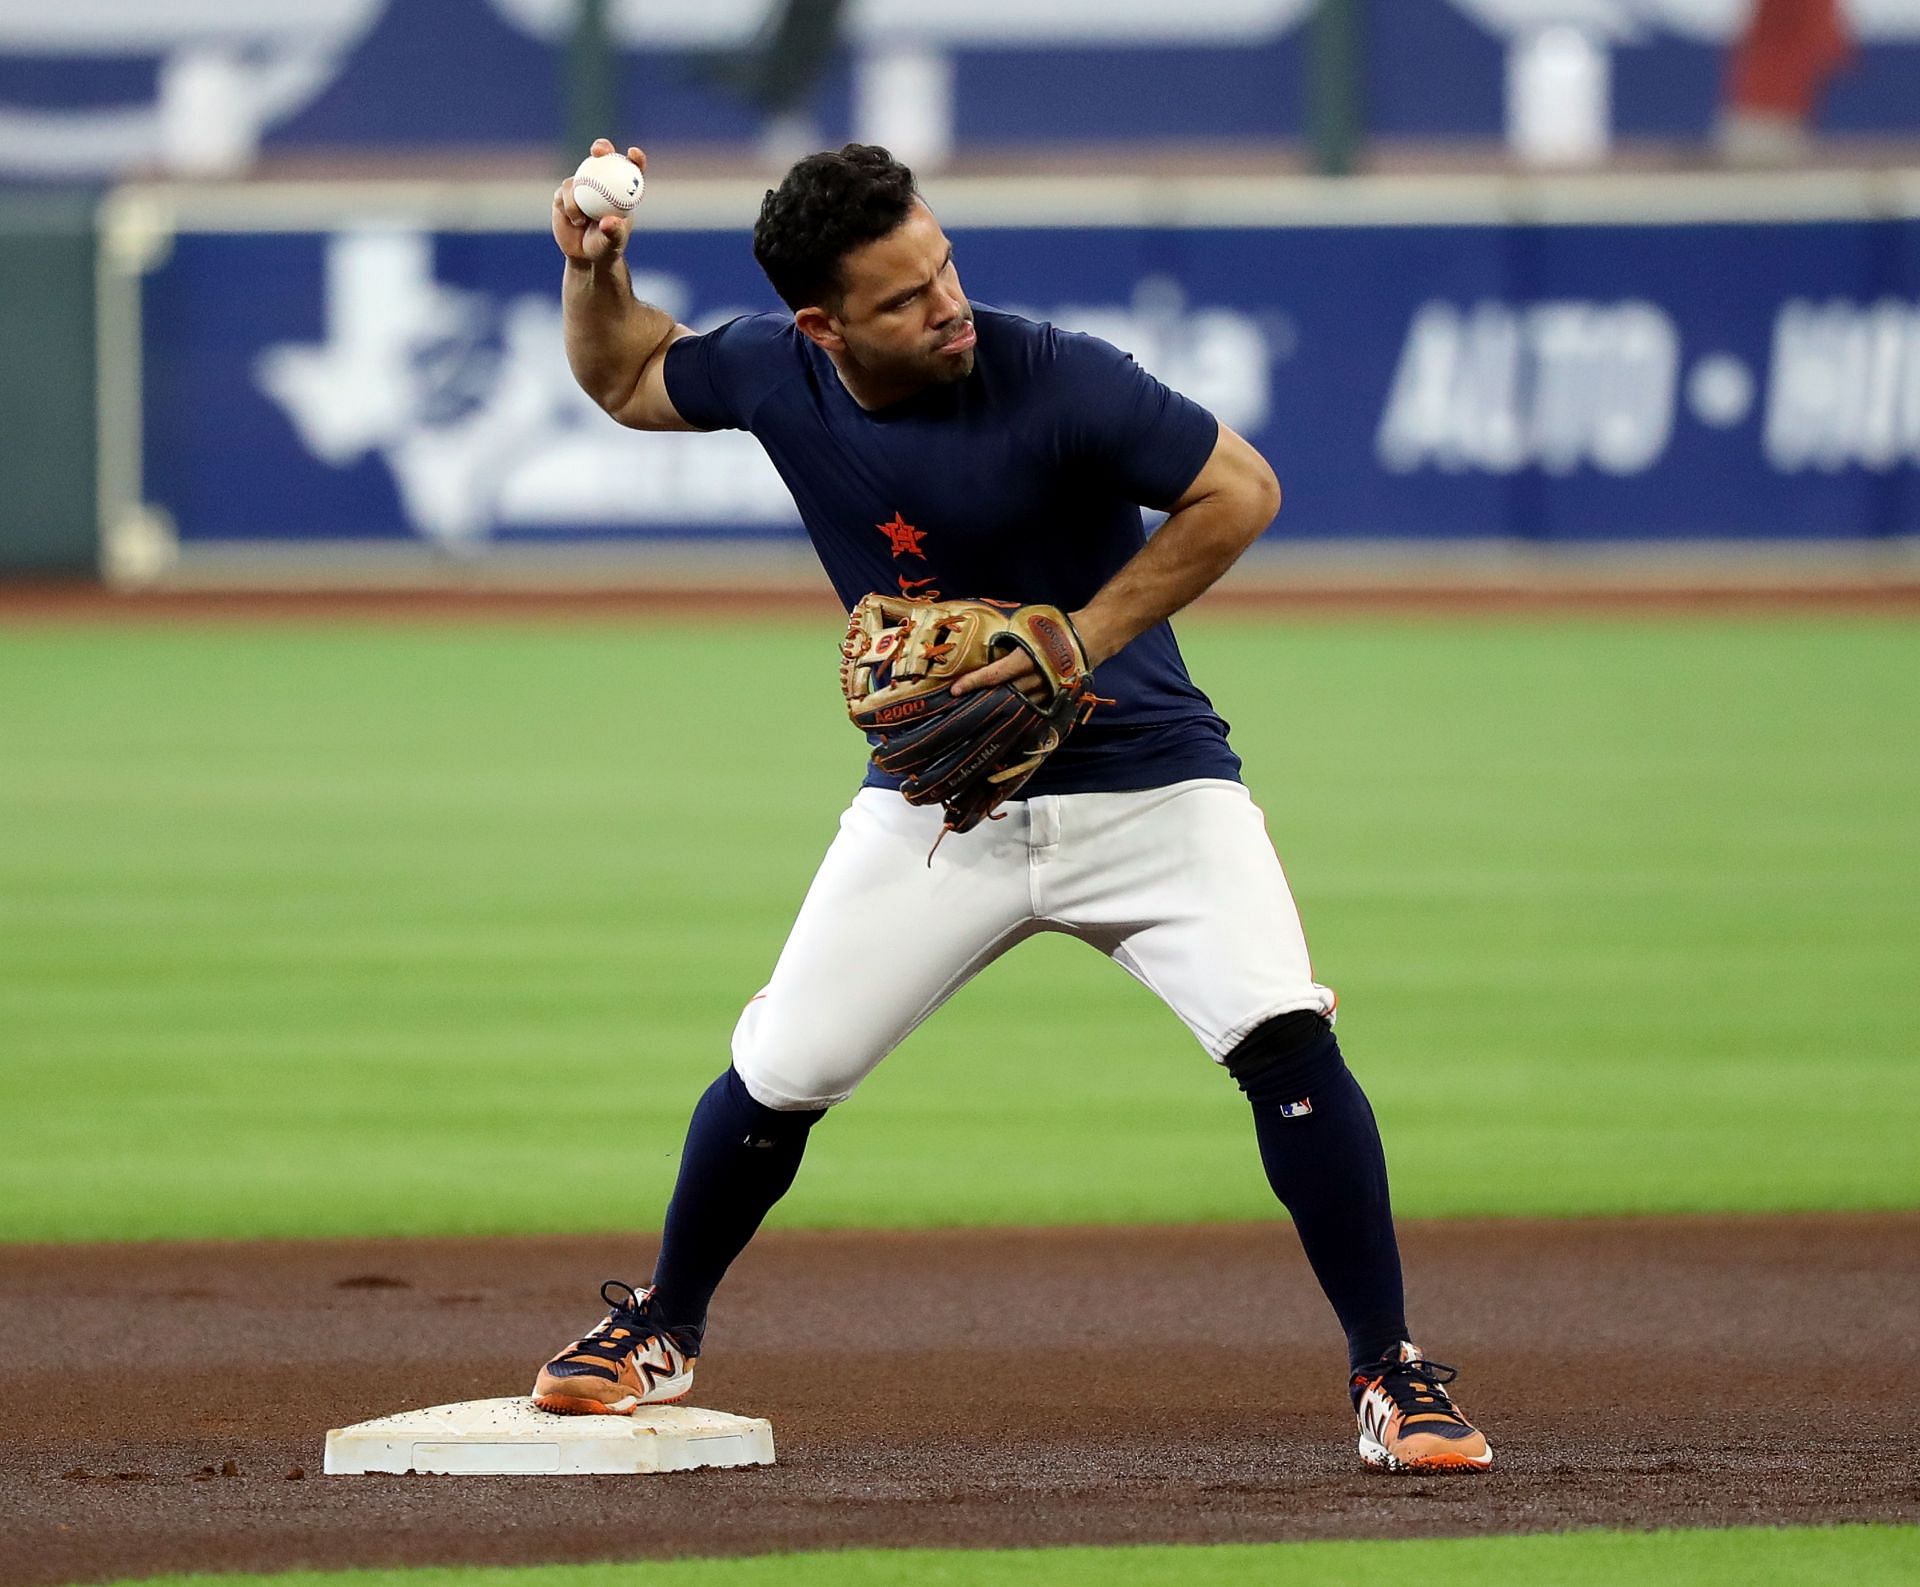 Nina Altuve's biography: what is known about Jose Altuve's wife? 